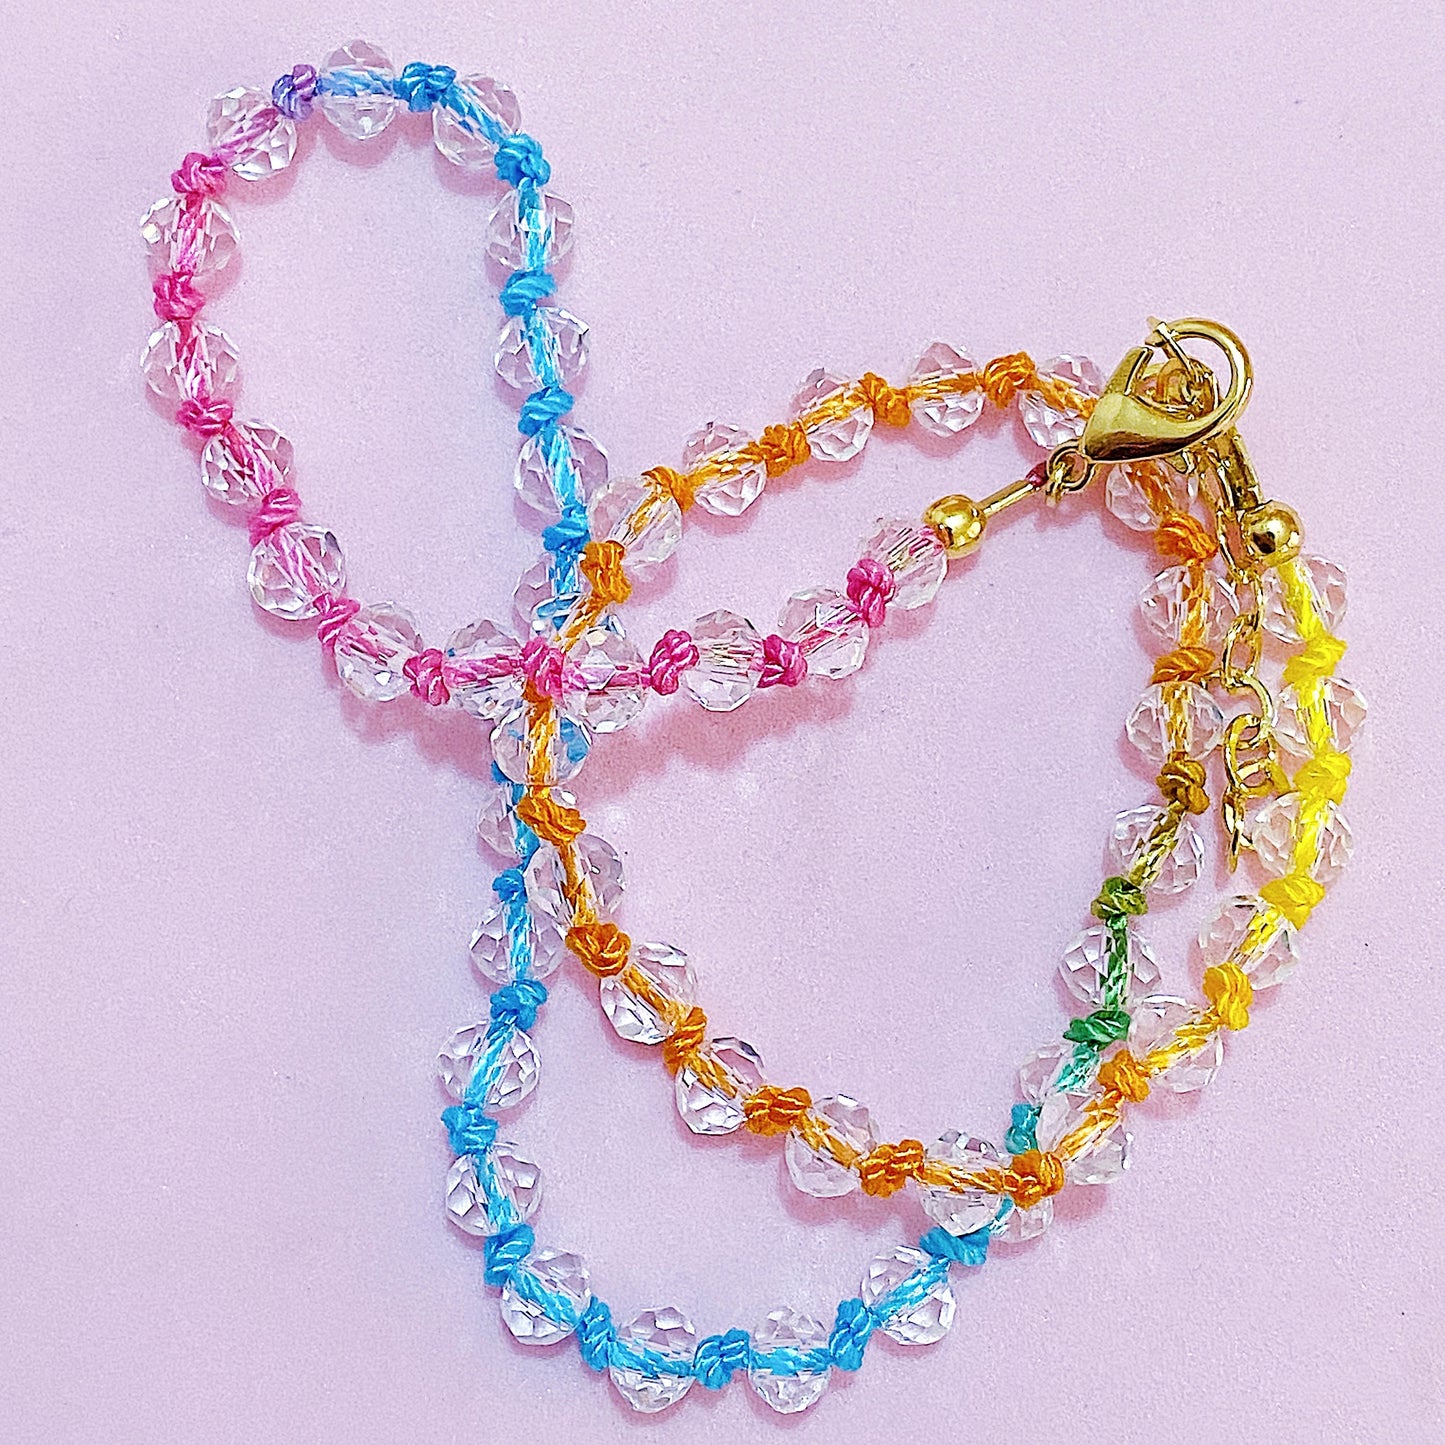 Rainbow Knotted Necklace